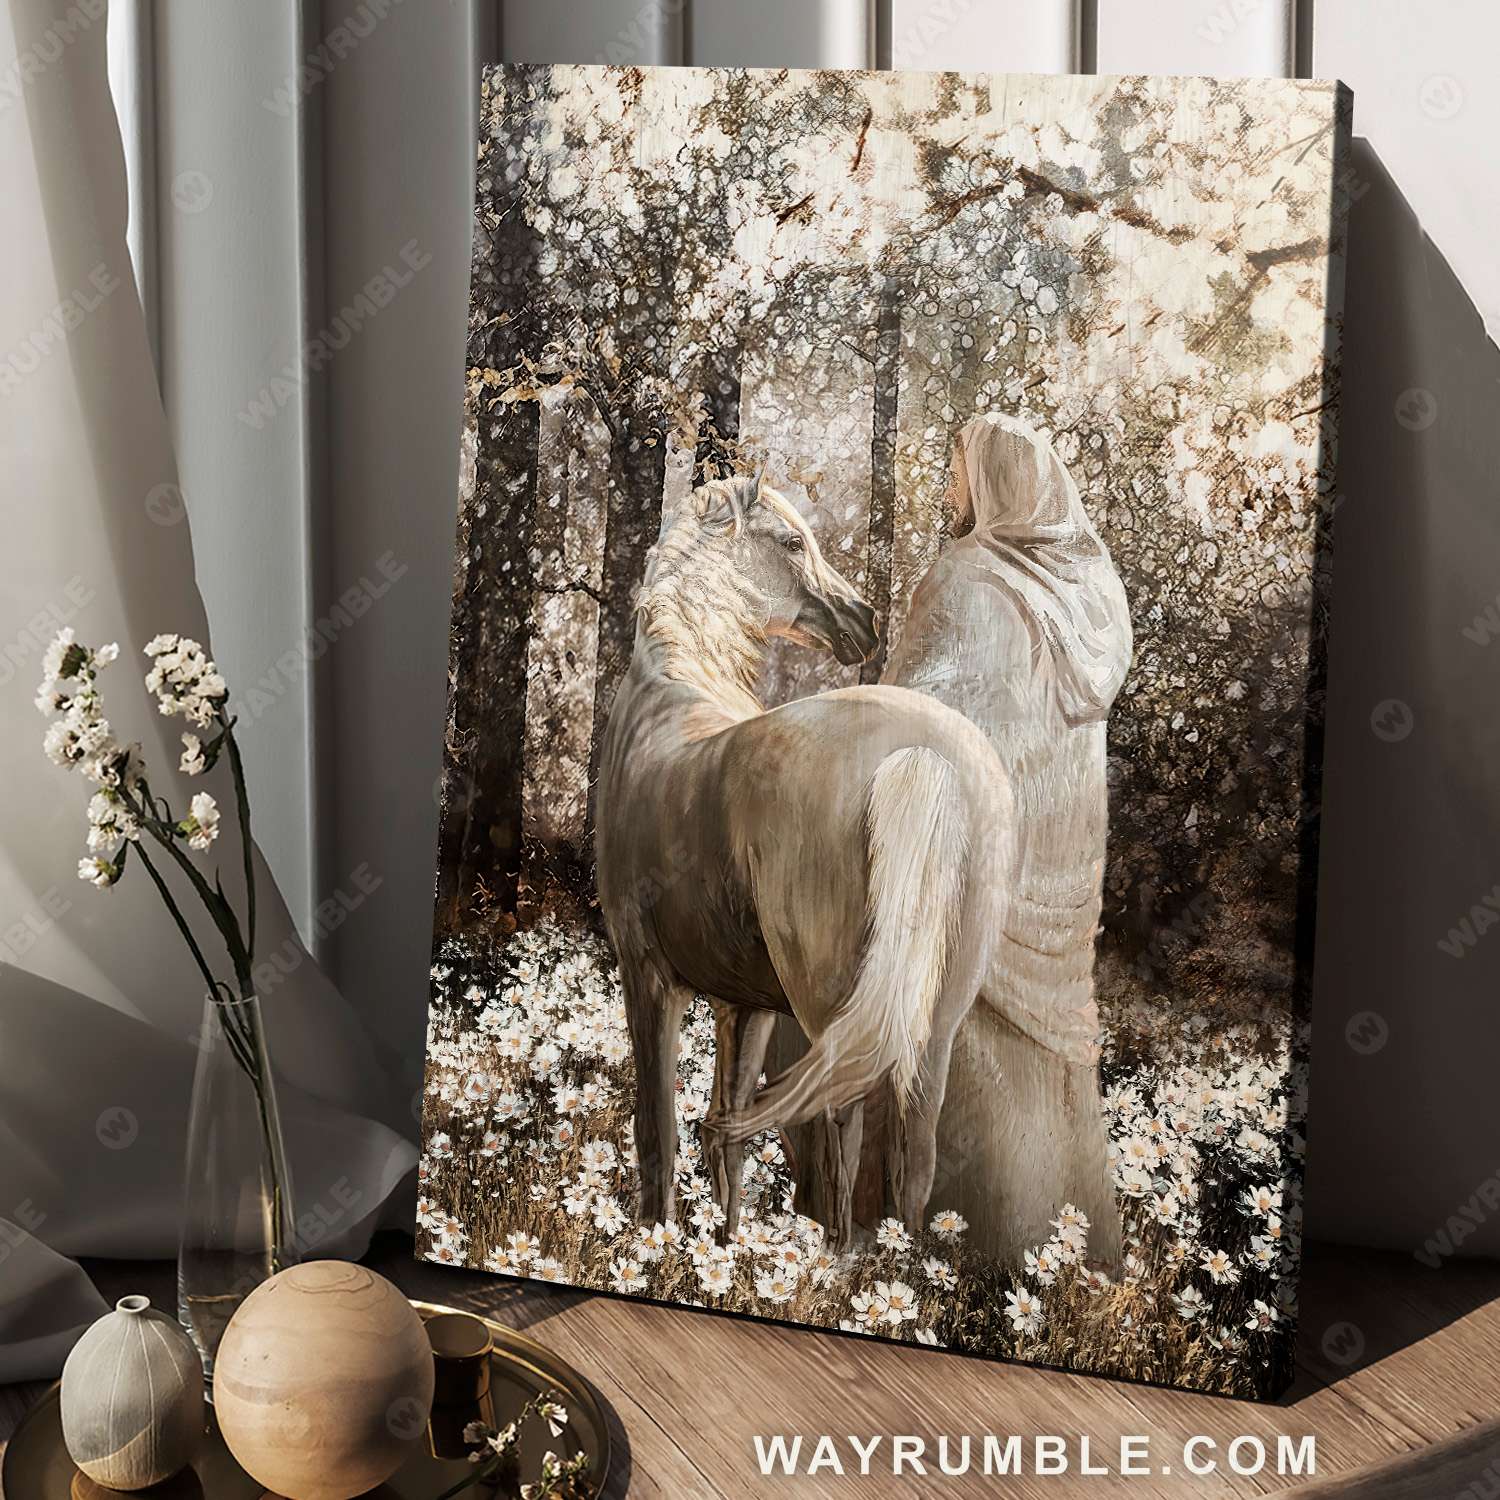 Jesus painting, Horse drawing, Walking with Jesus, Into the forest - Jesus Portrait Canvas Prints, Christian Wall Art